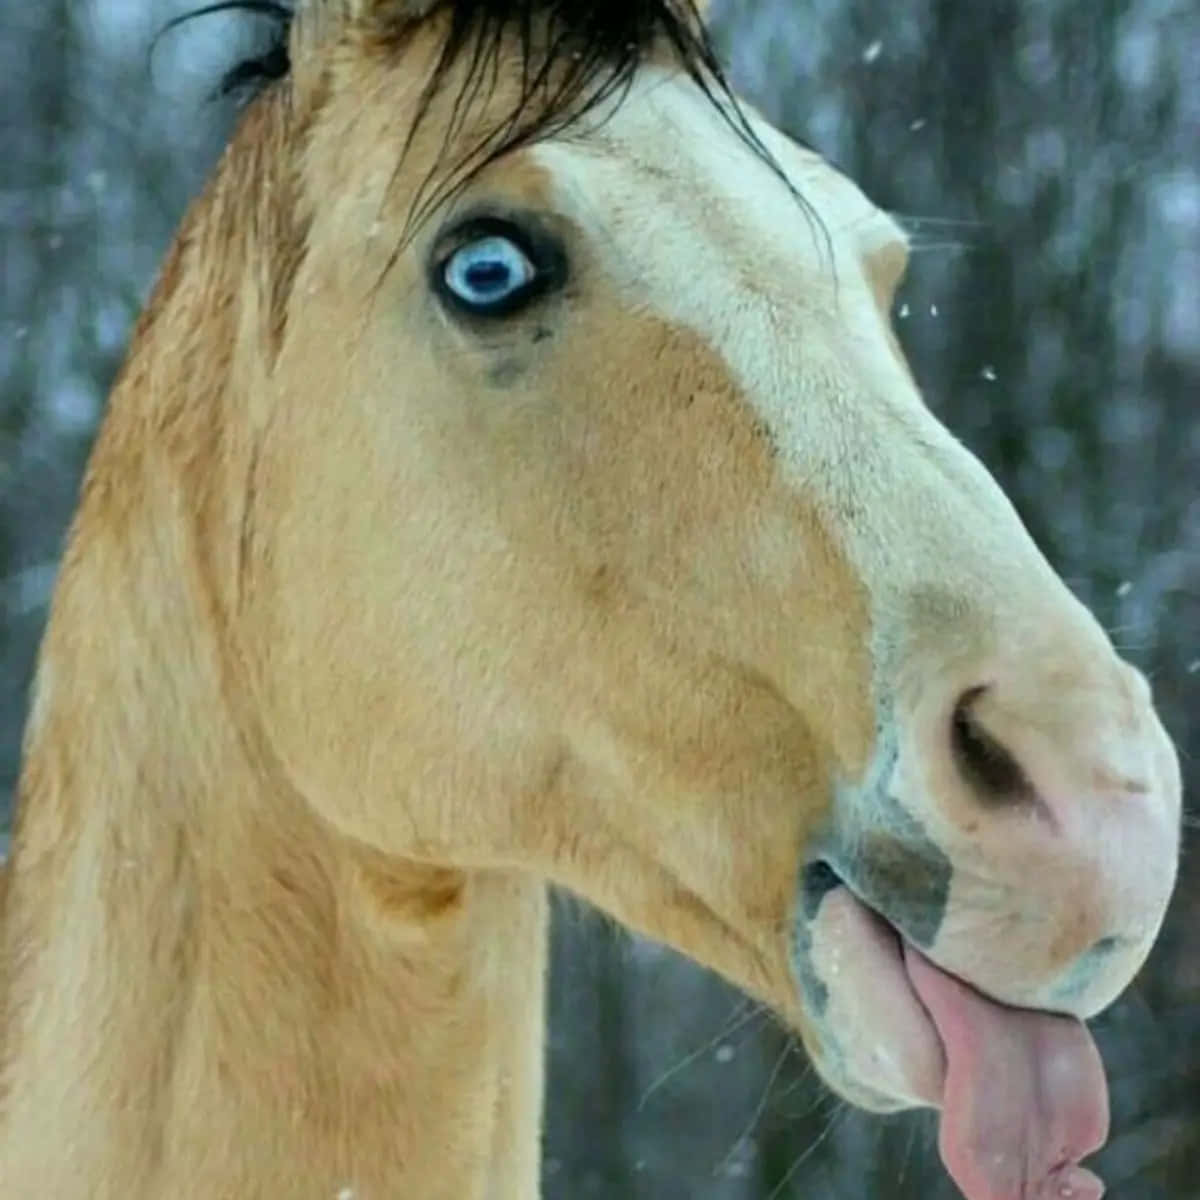 Funny Horse Tongue-out Pictures 1200 x 1200 Picture